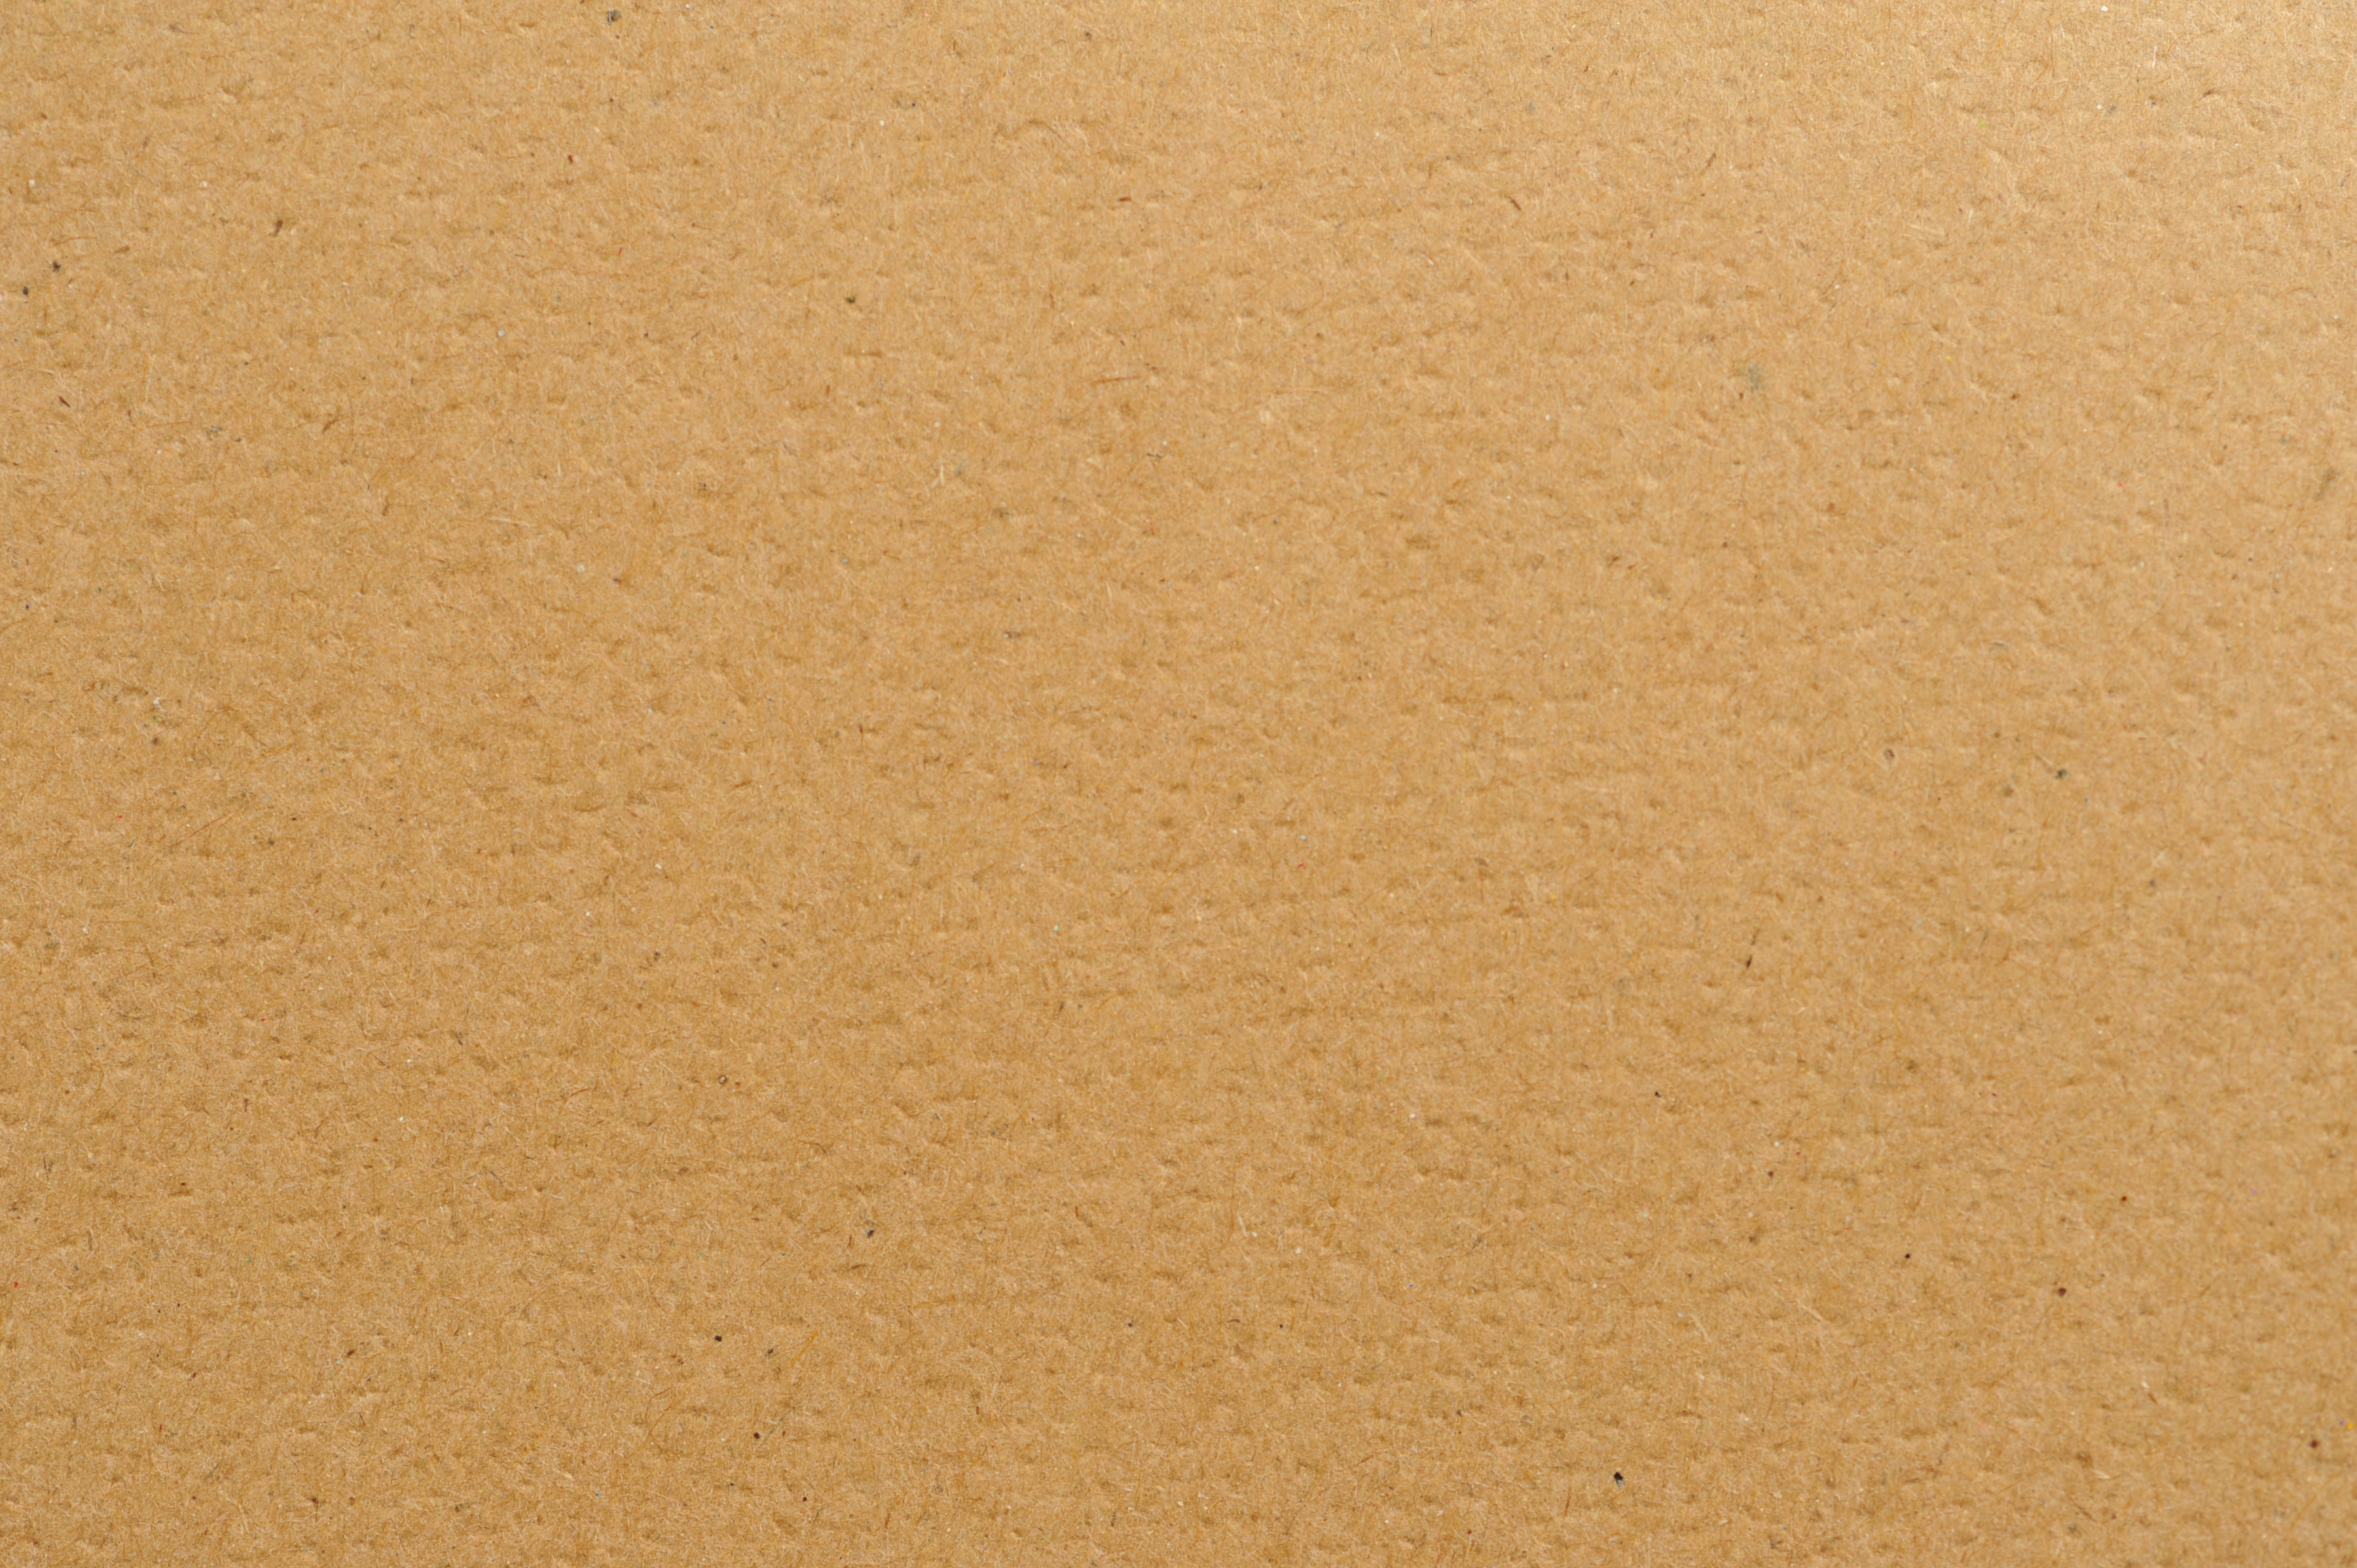 Cardboard surface background texture-9444 | Stockarch Free Stock Photos